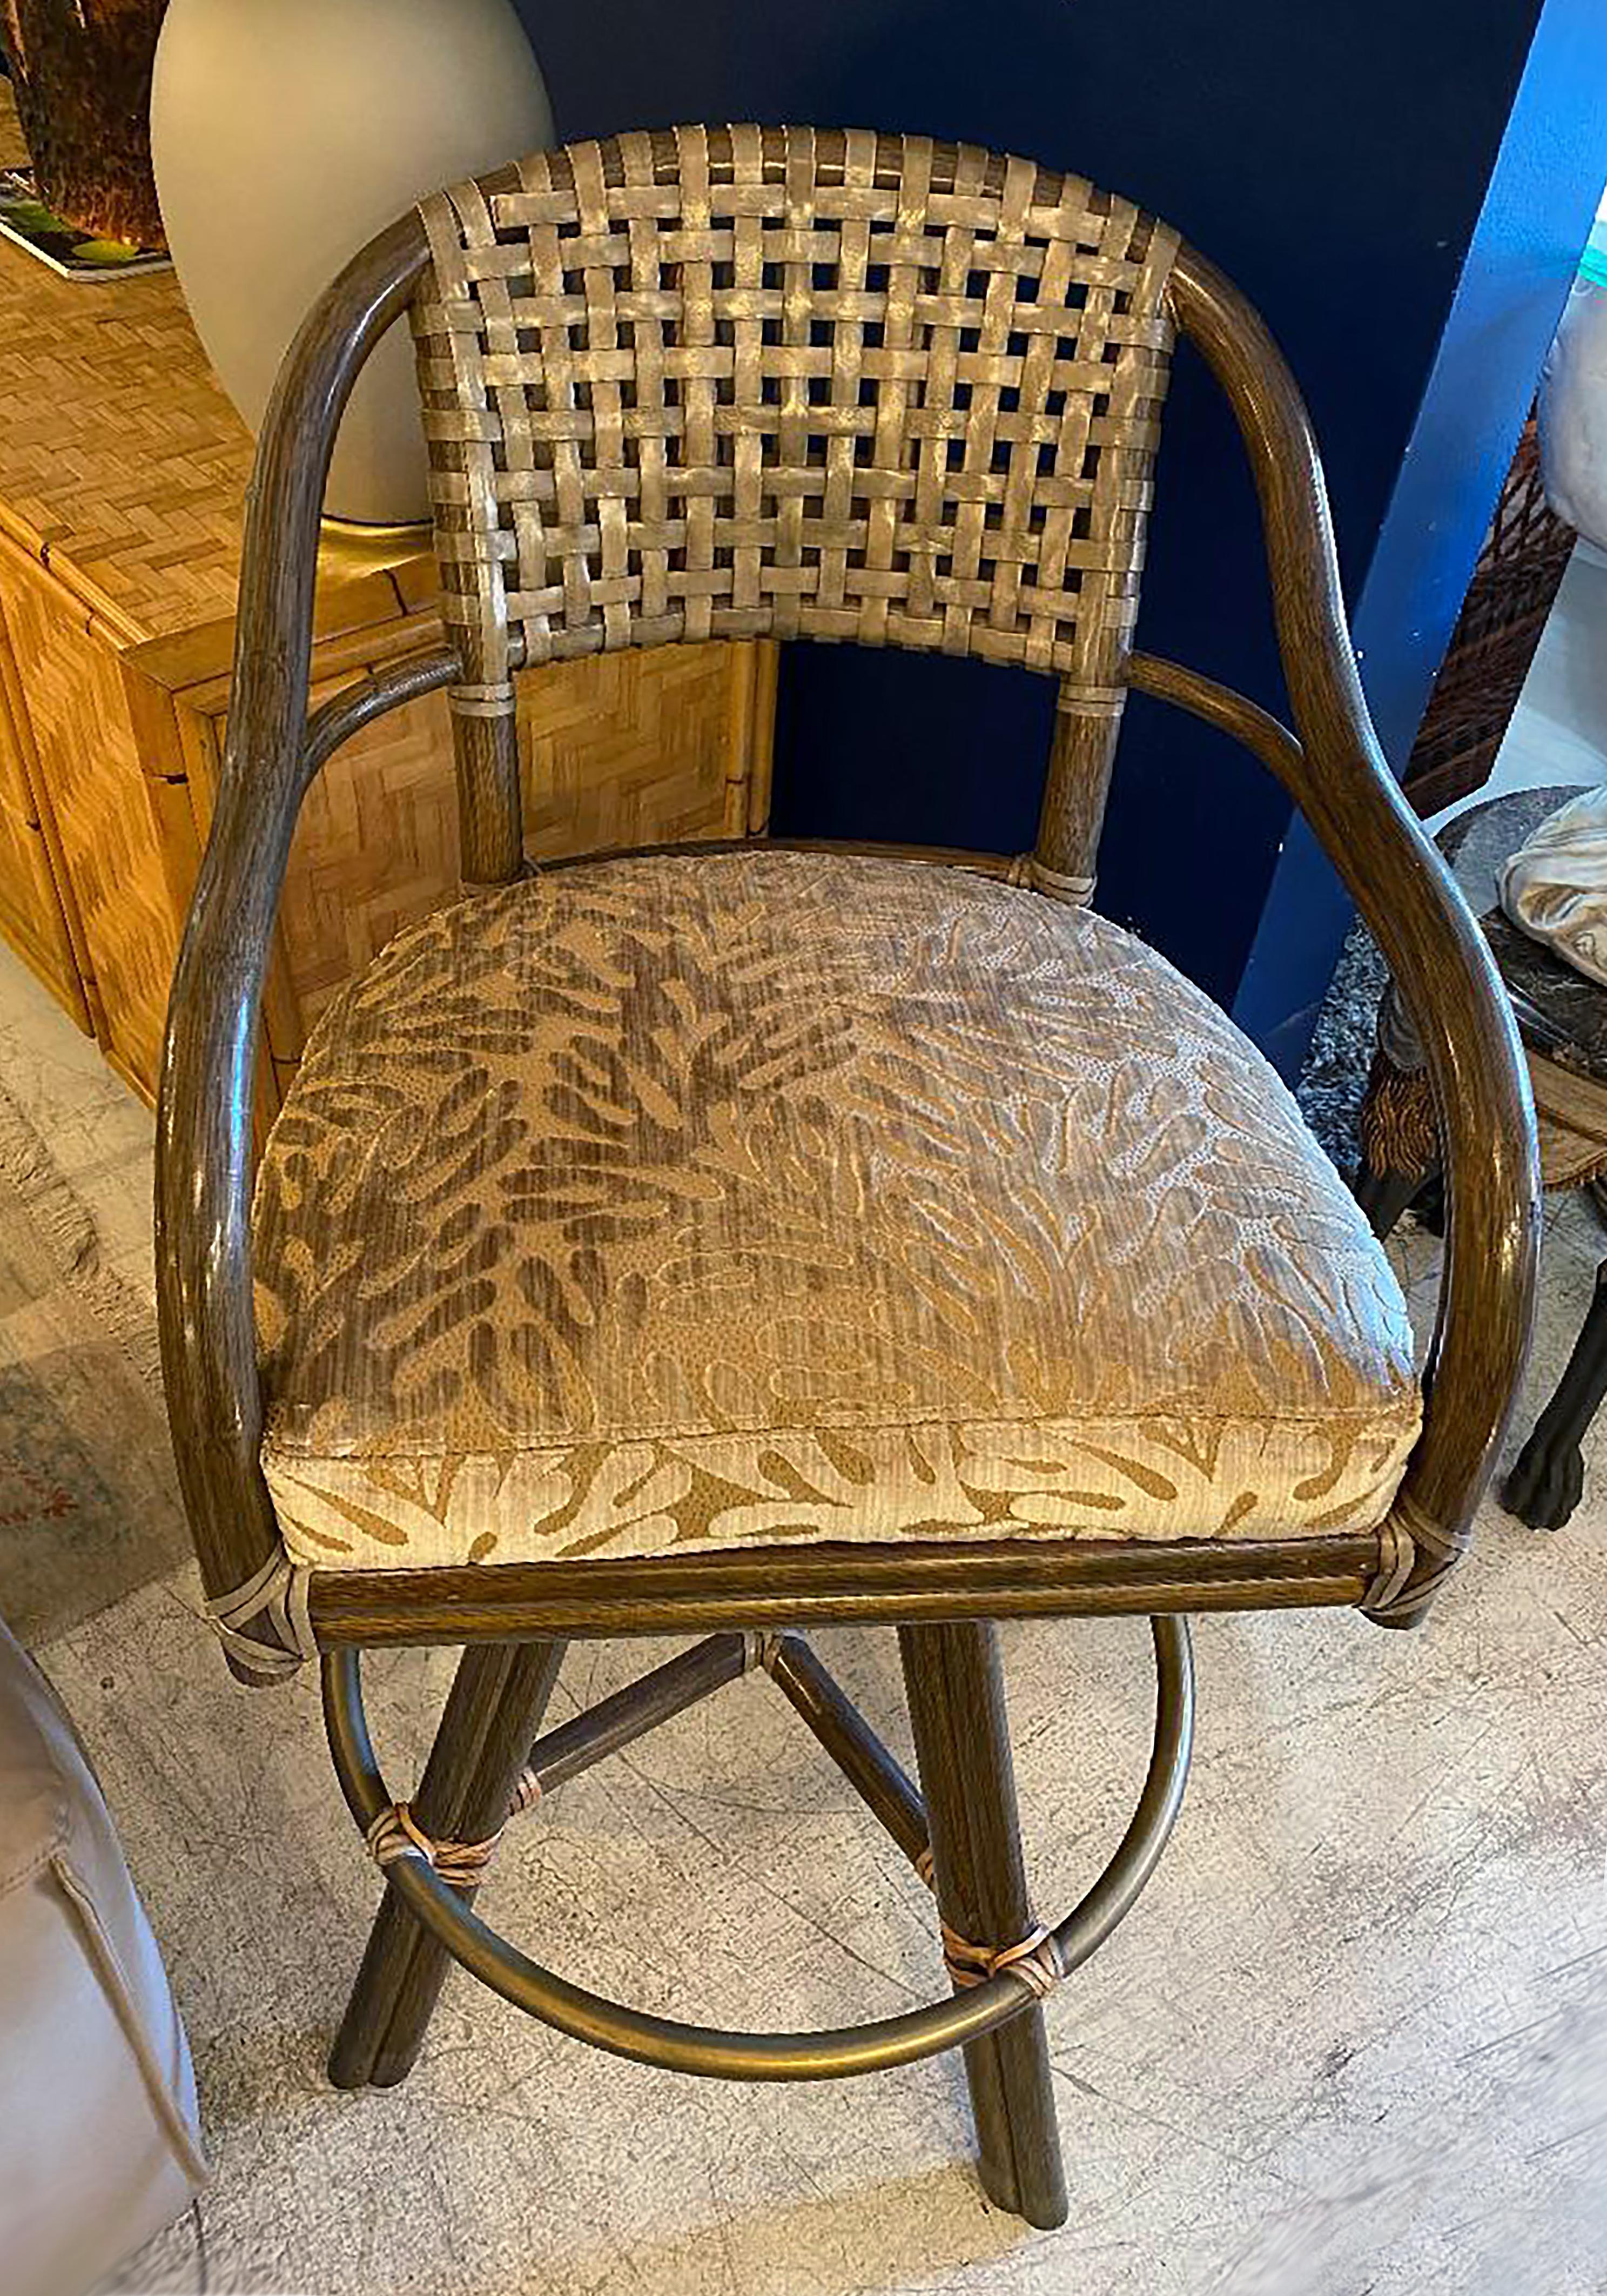 Vintage McGuire rattan and leather swivel bar stools, set of 3

Offered for sale is a set of three vintage McGuire bent rattan and woven leather swivel bar stools. The stools are from the McGuire San Francisco Collection and they have been newly